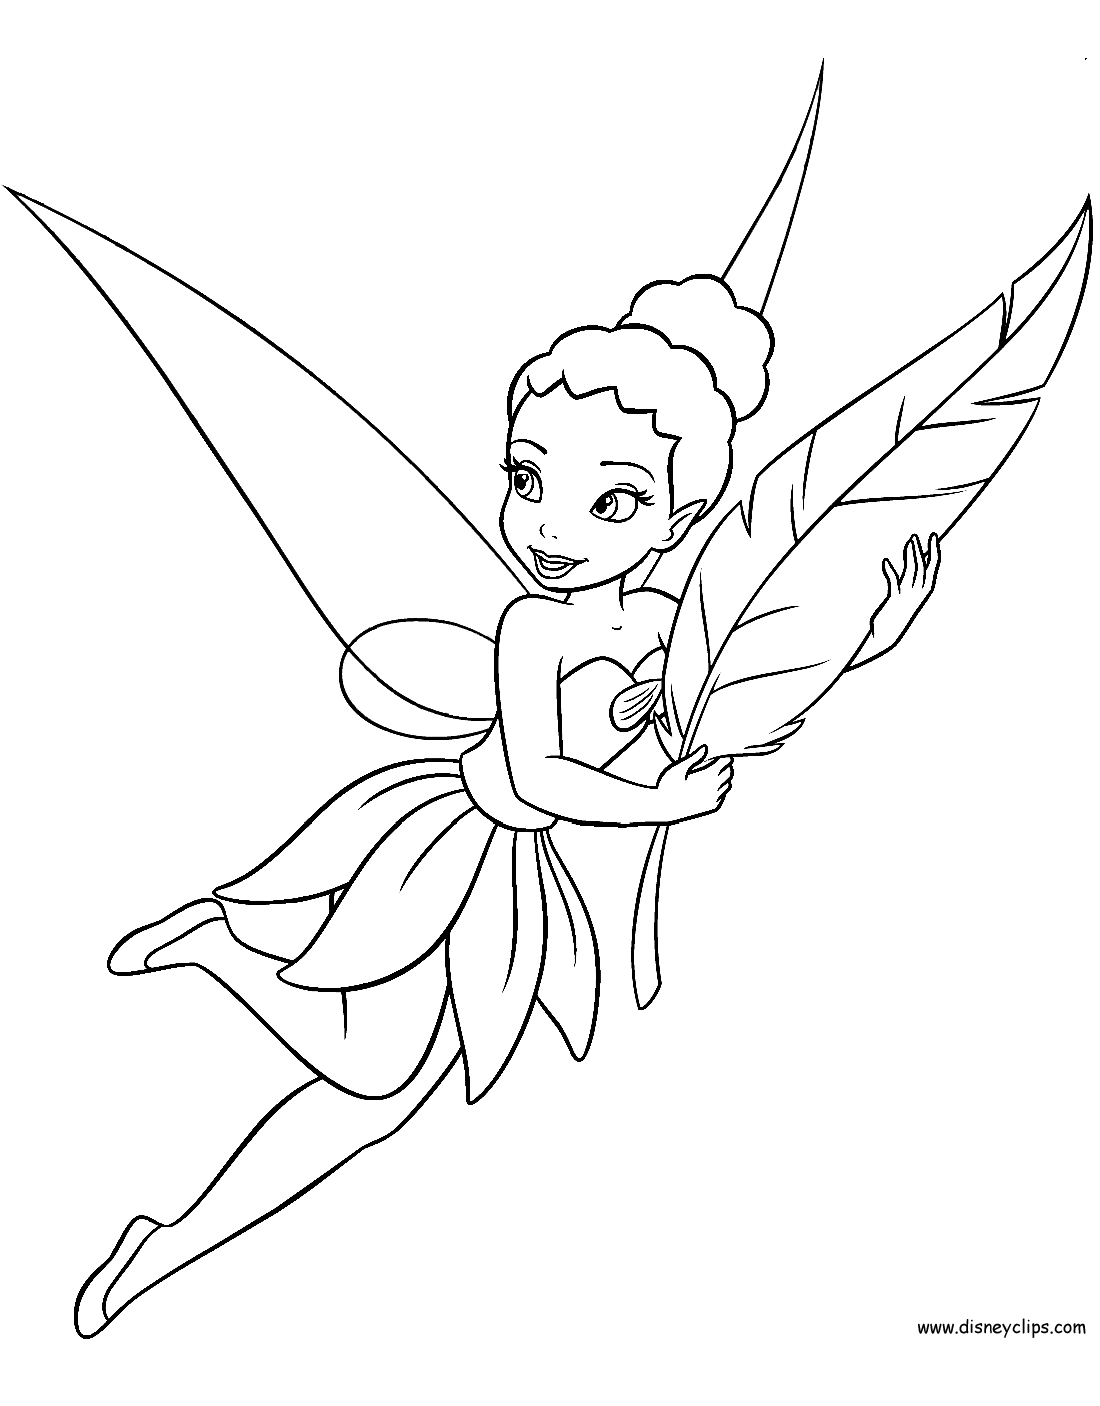 Download Disney Fairies Coloring Pages (2) | Disneyclips.com